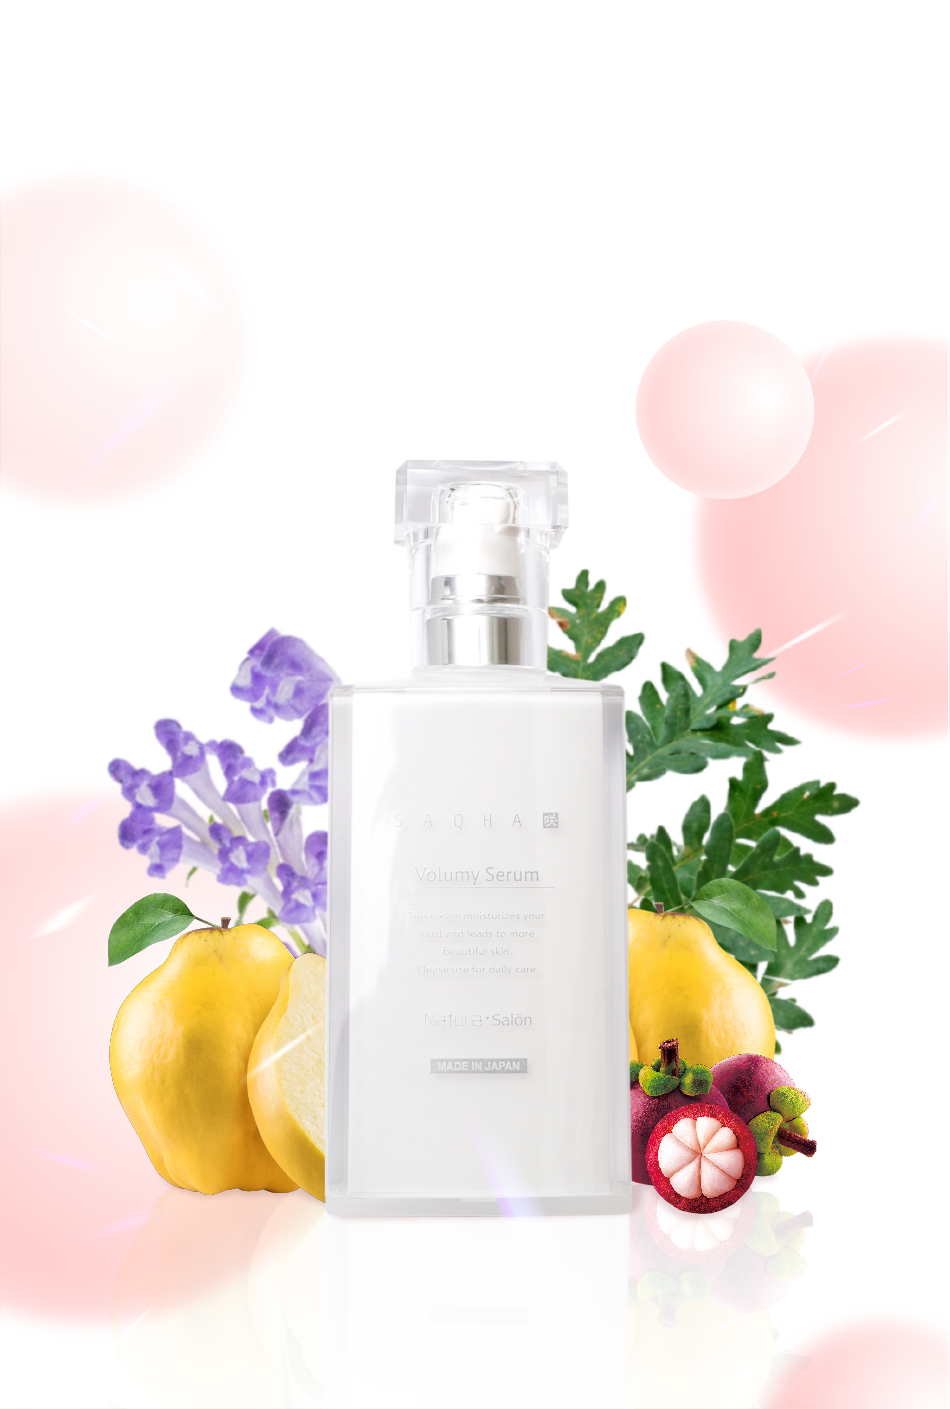 SAQHA Volumey Serum Ingredients indispensable for expanding the bosom are thoroughly blended in plentiful “abundance.”